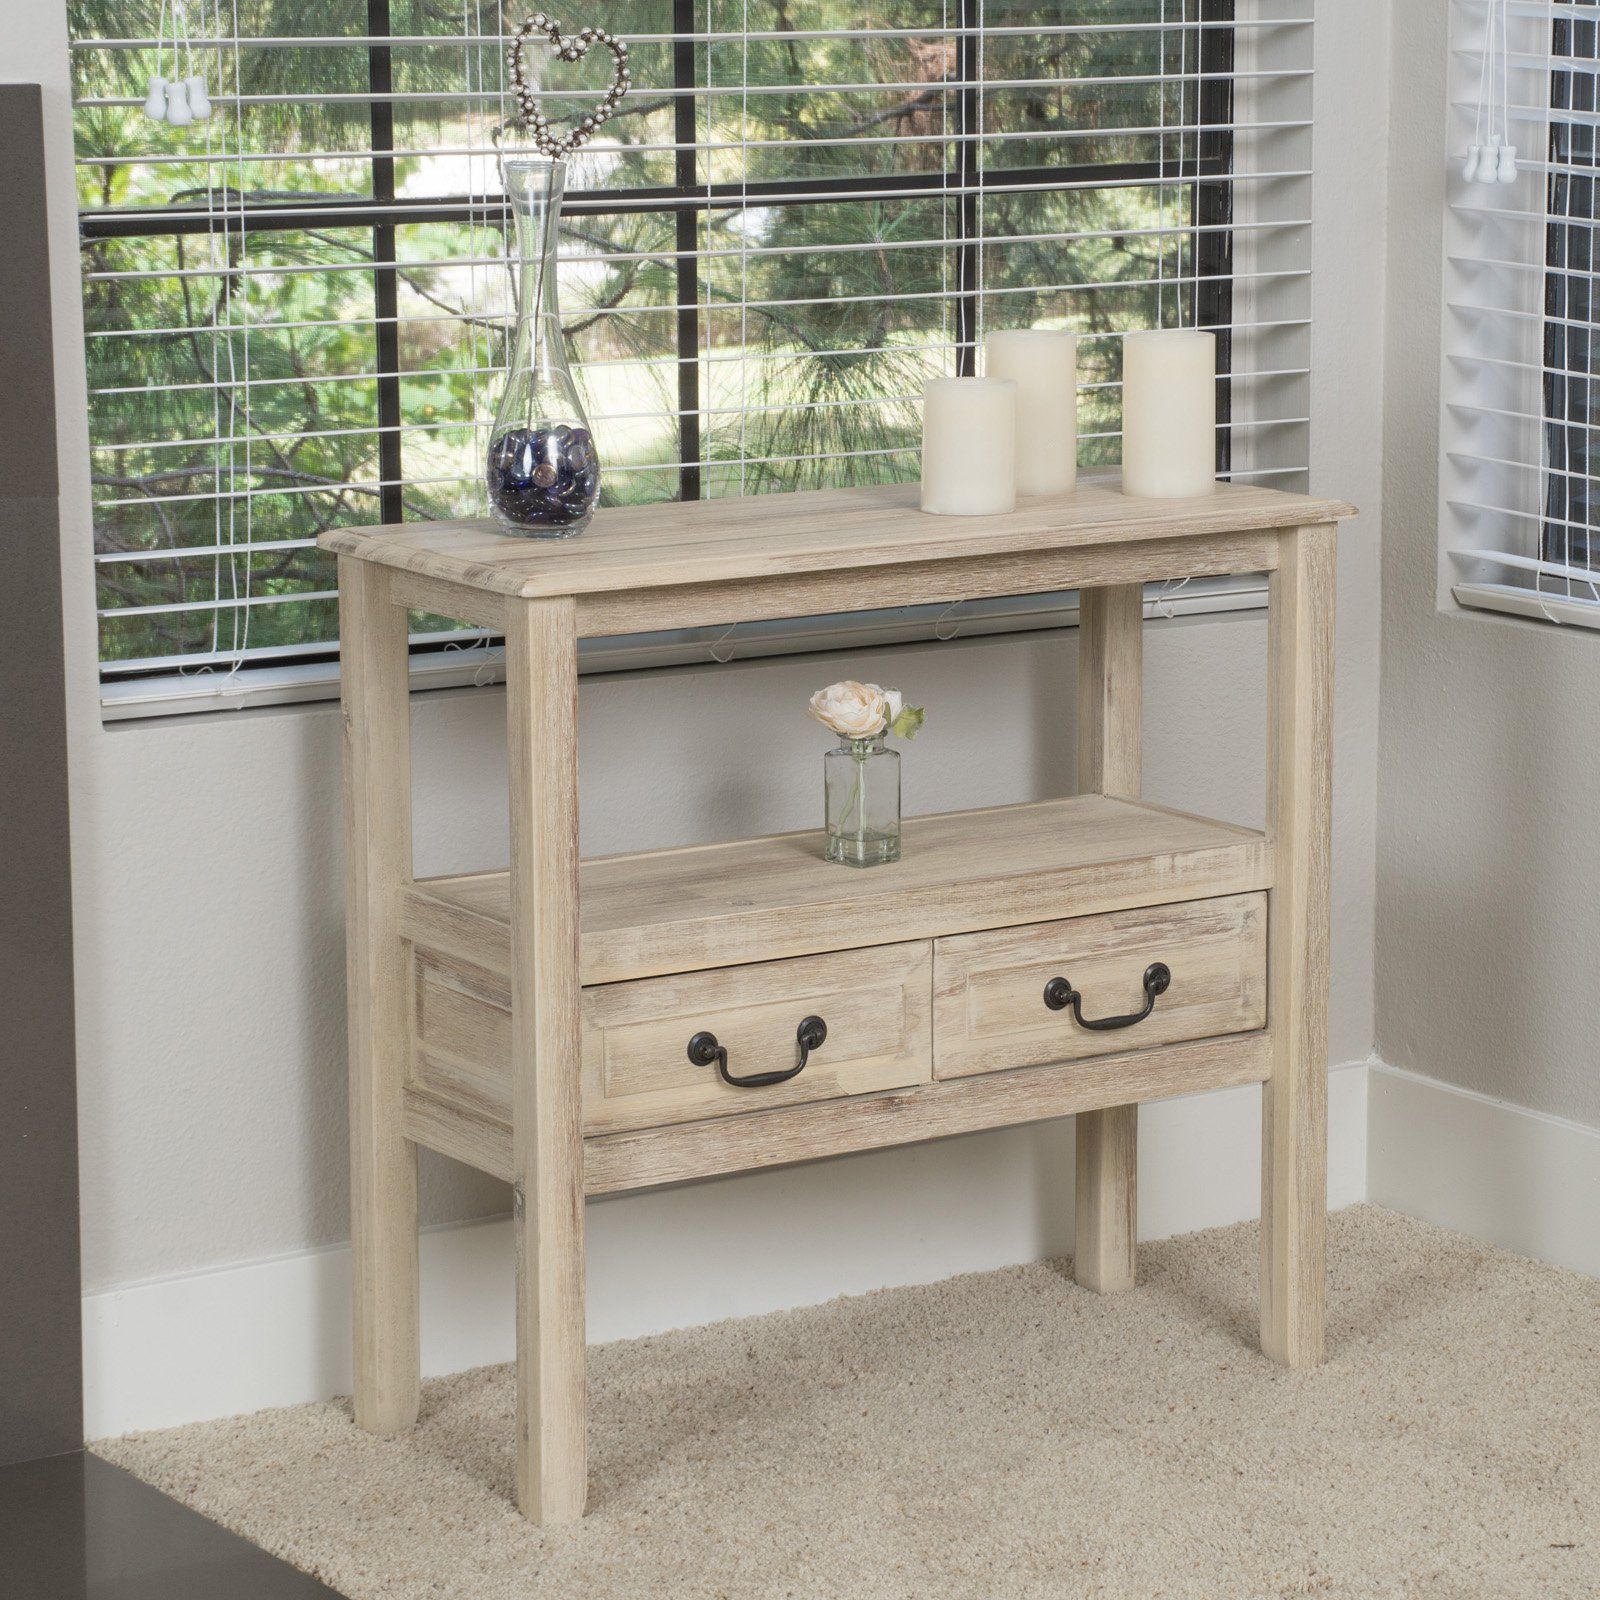 Ramsey Acacia Wood Console Table – Walmart – Walmart Intended For Best And Newest Wood Console Tables (View 6 of 10)